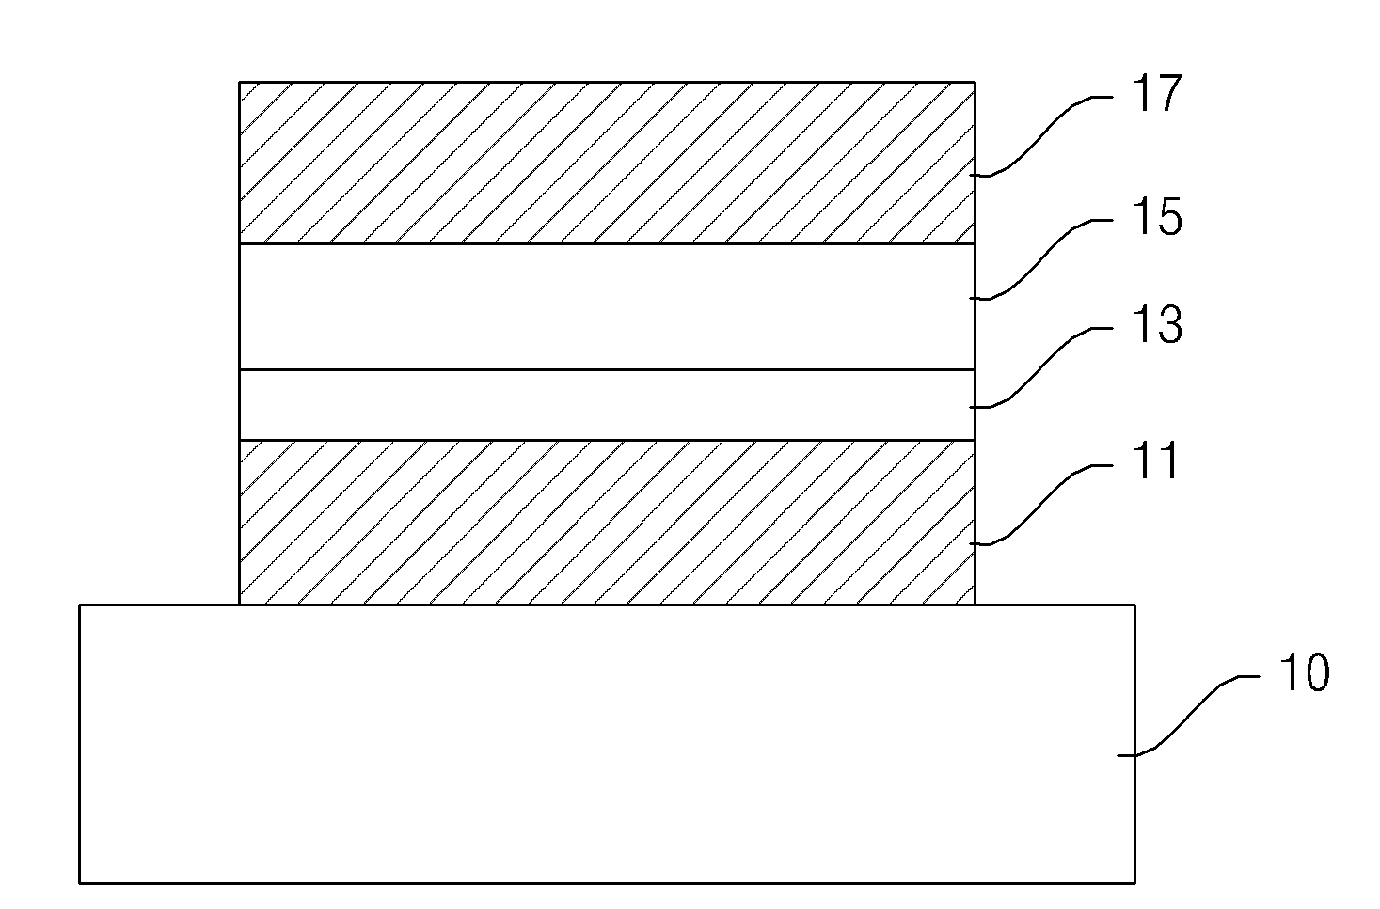 Resistance ram having oxide layer and solid electrolyte layer, and method for operating the same